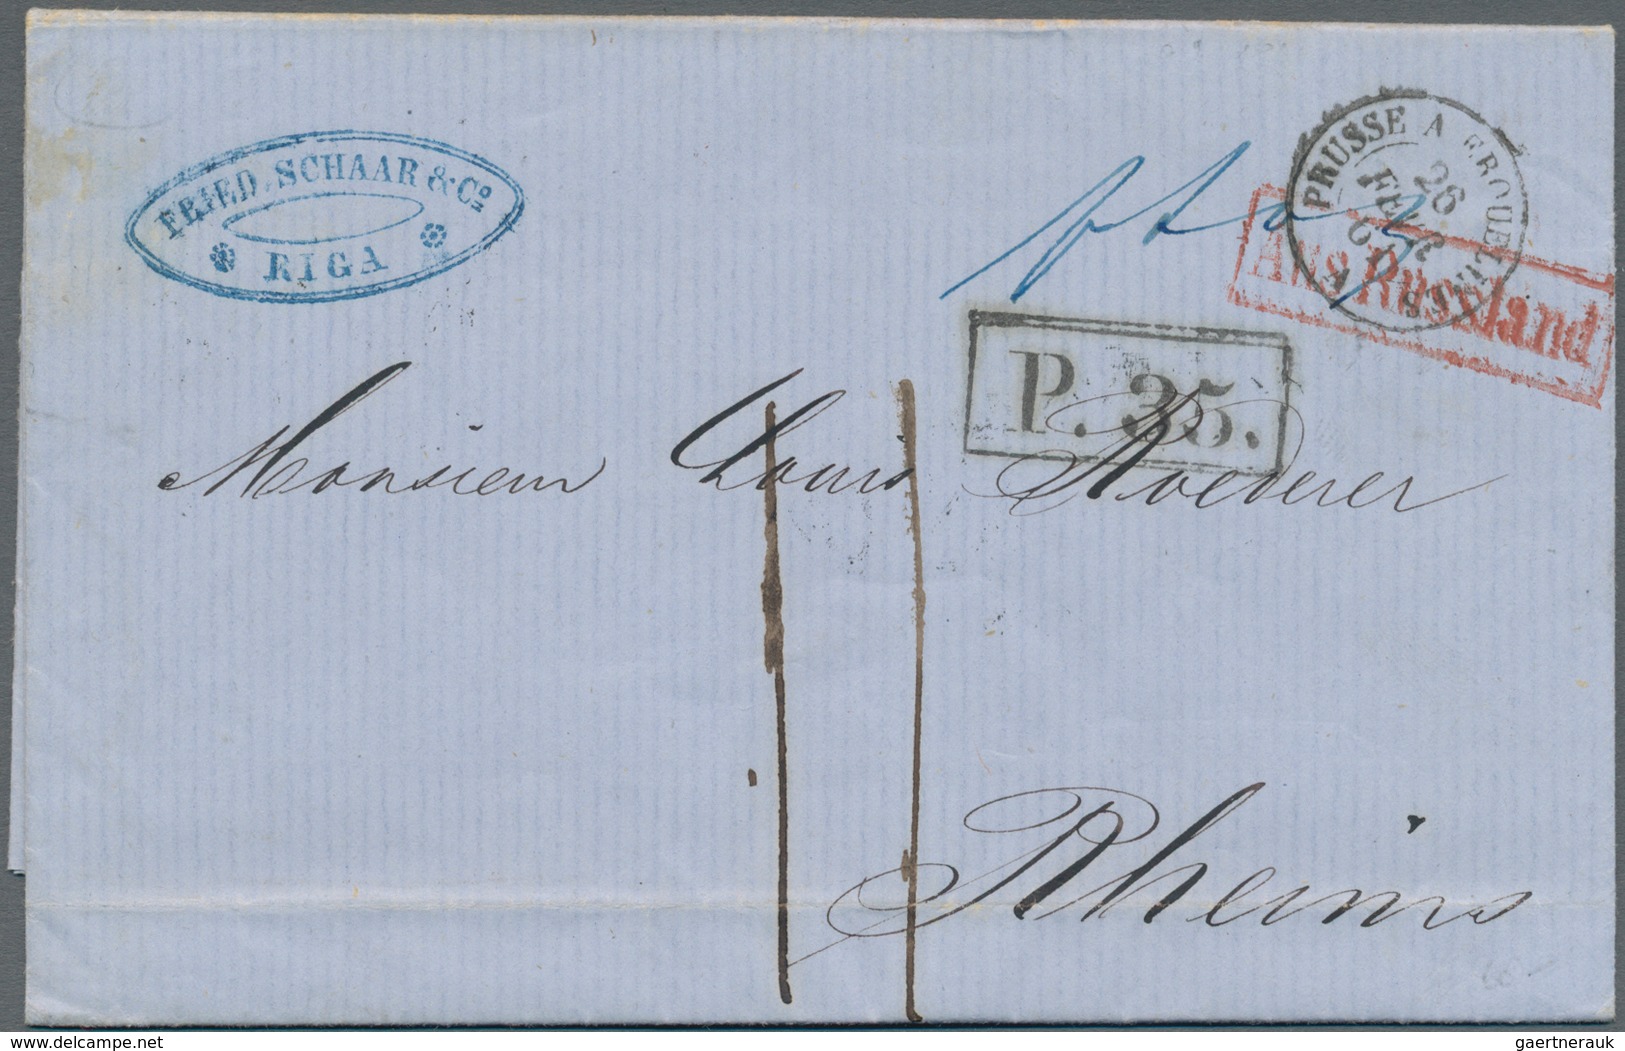 Russland: 1860/1867, four stampless lettersheets correspondence Riga-Reims/France, each with full me